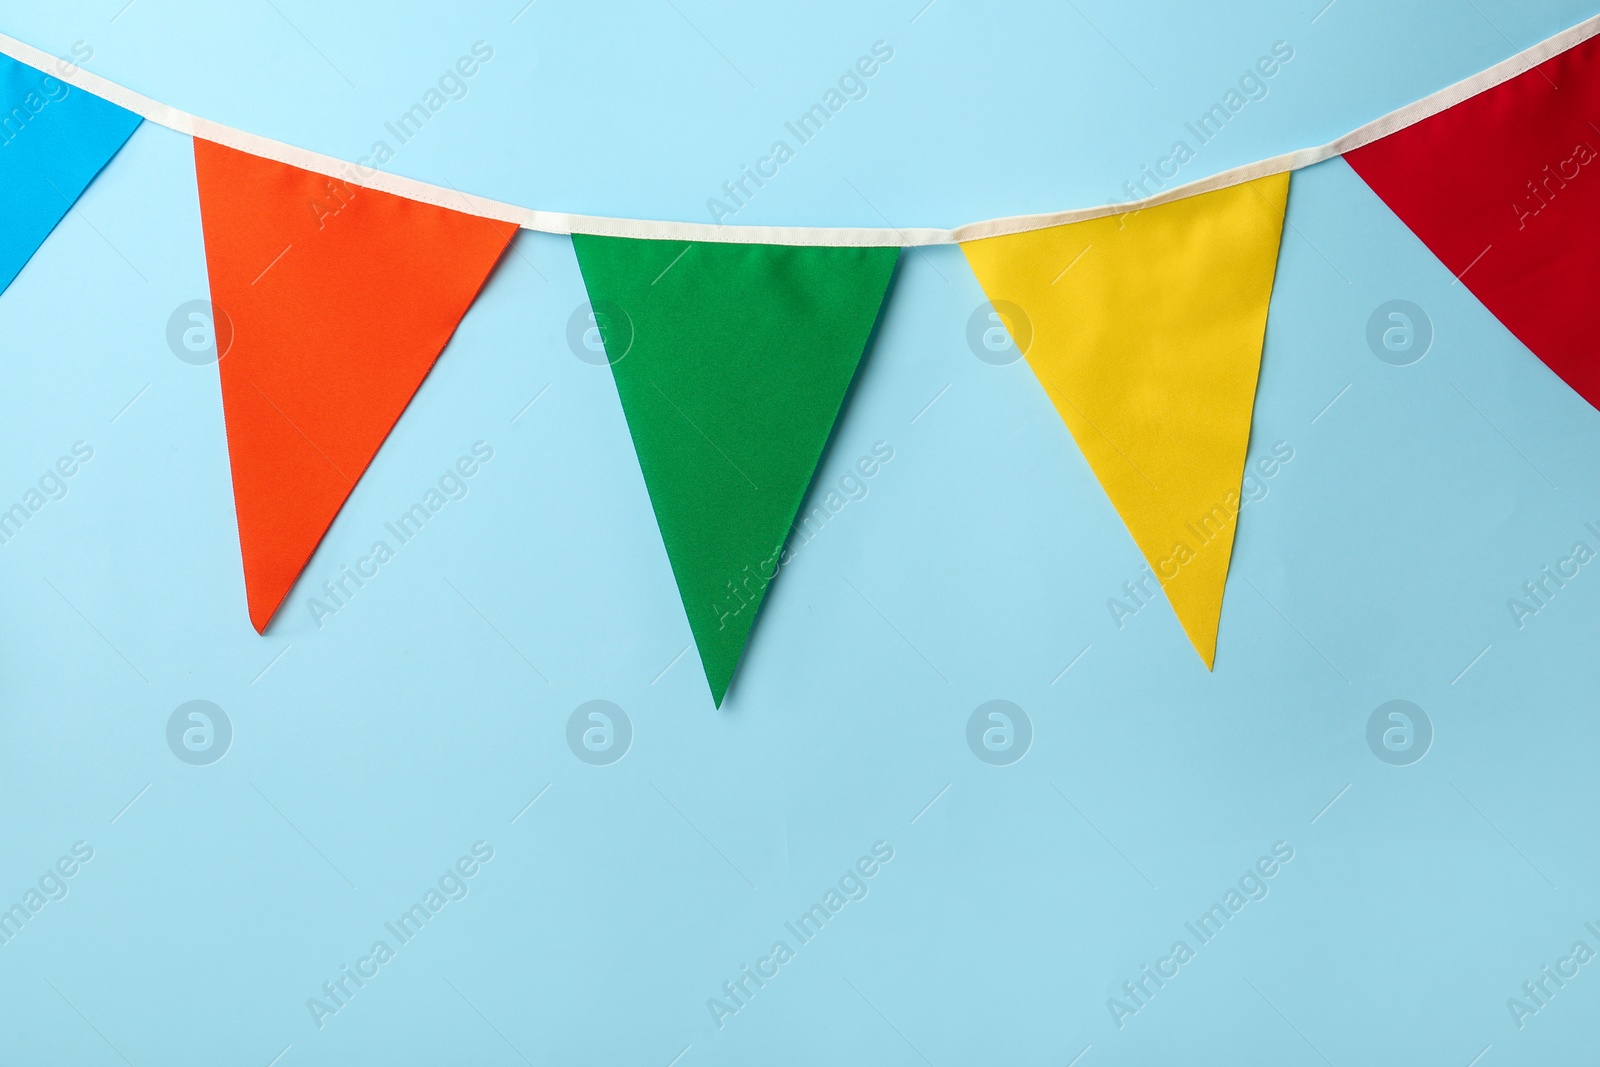 Photo of Bunting with colorful triangular flags on light blue background